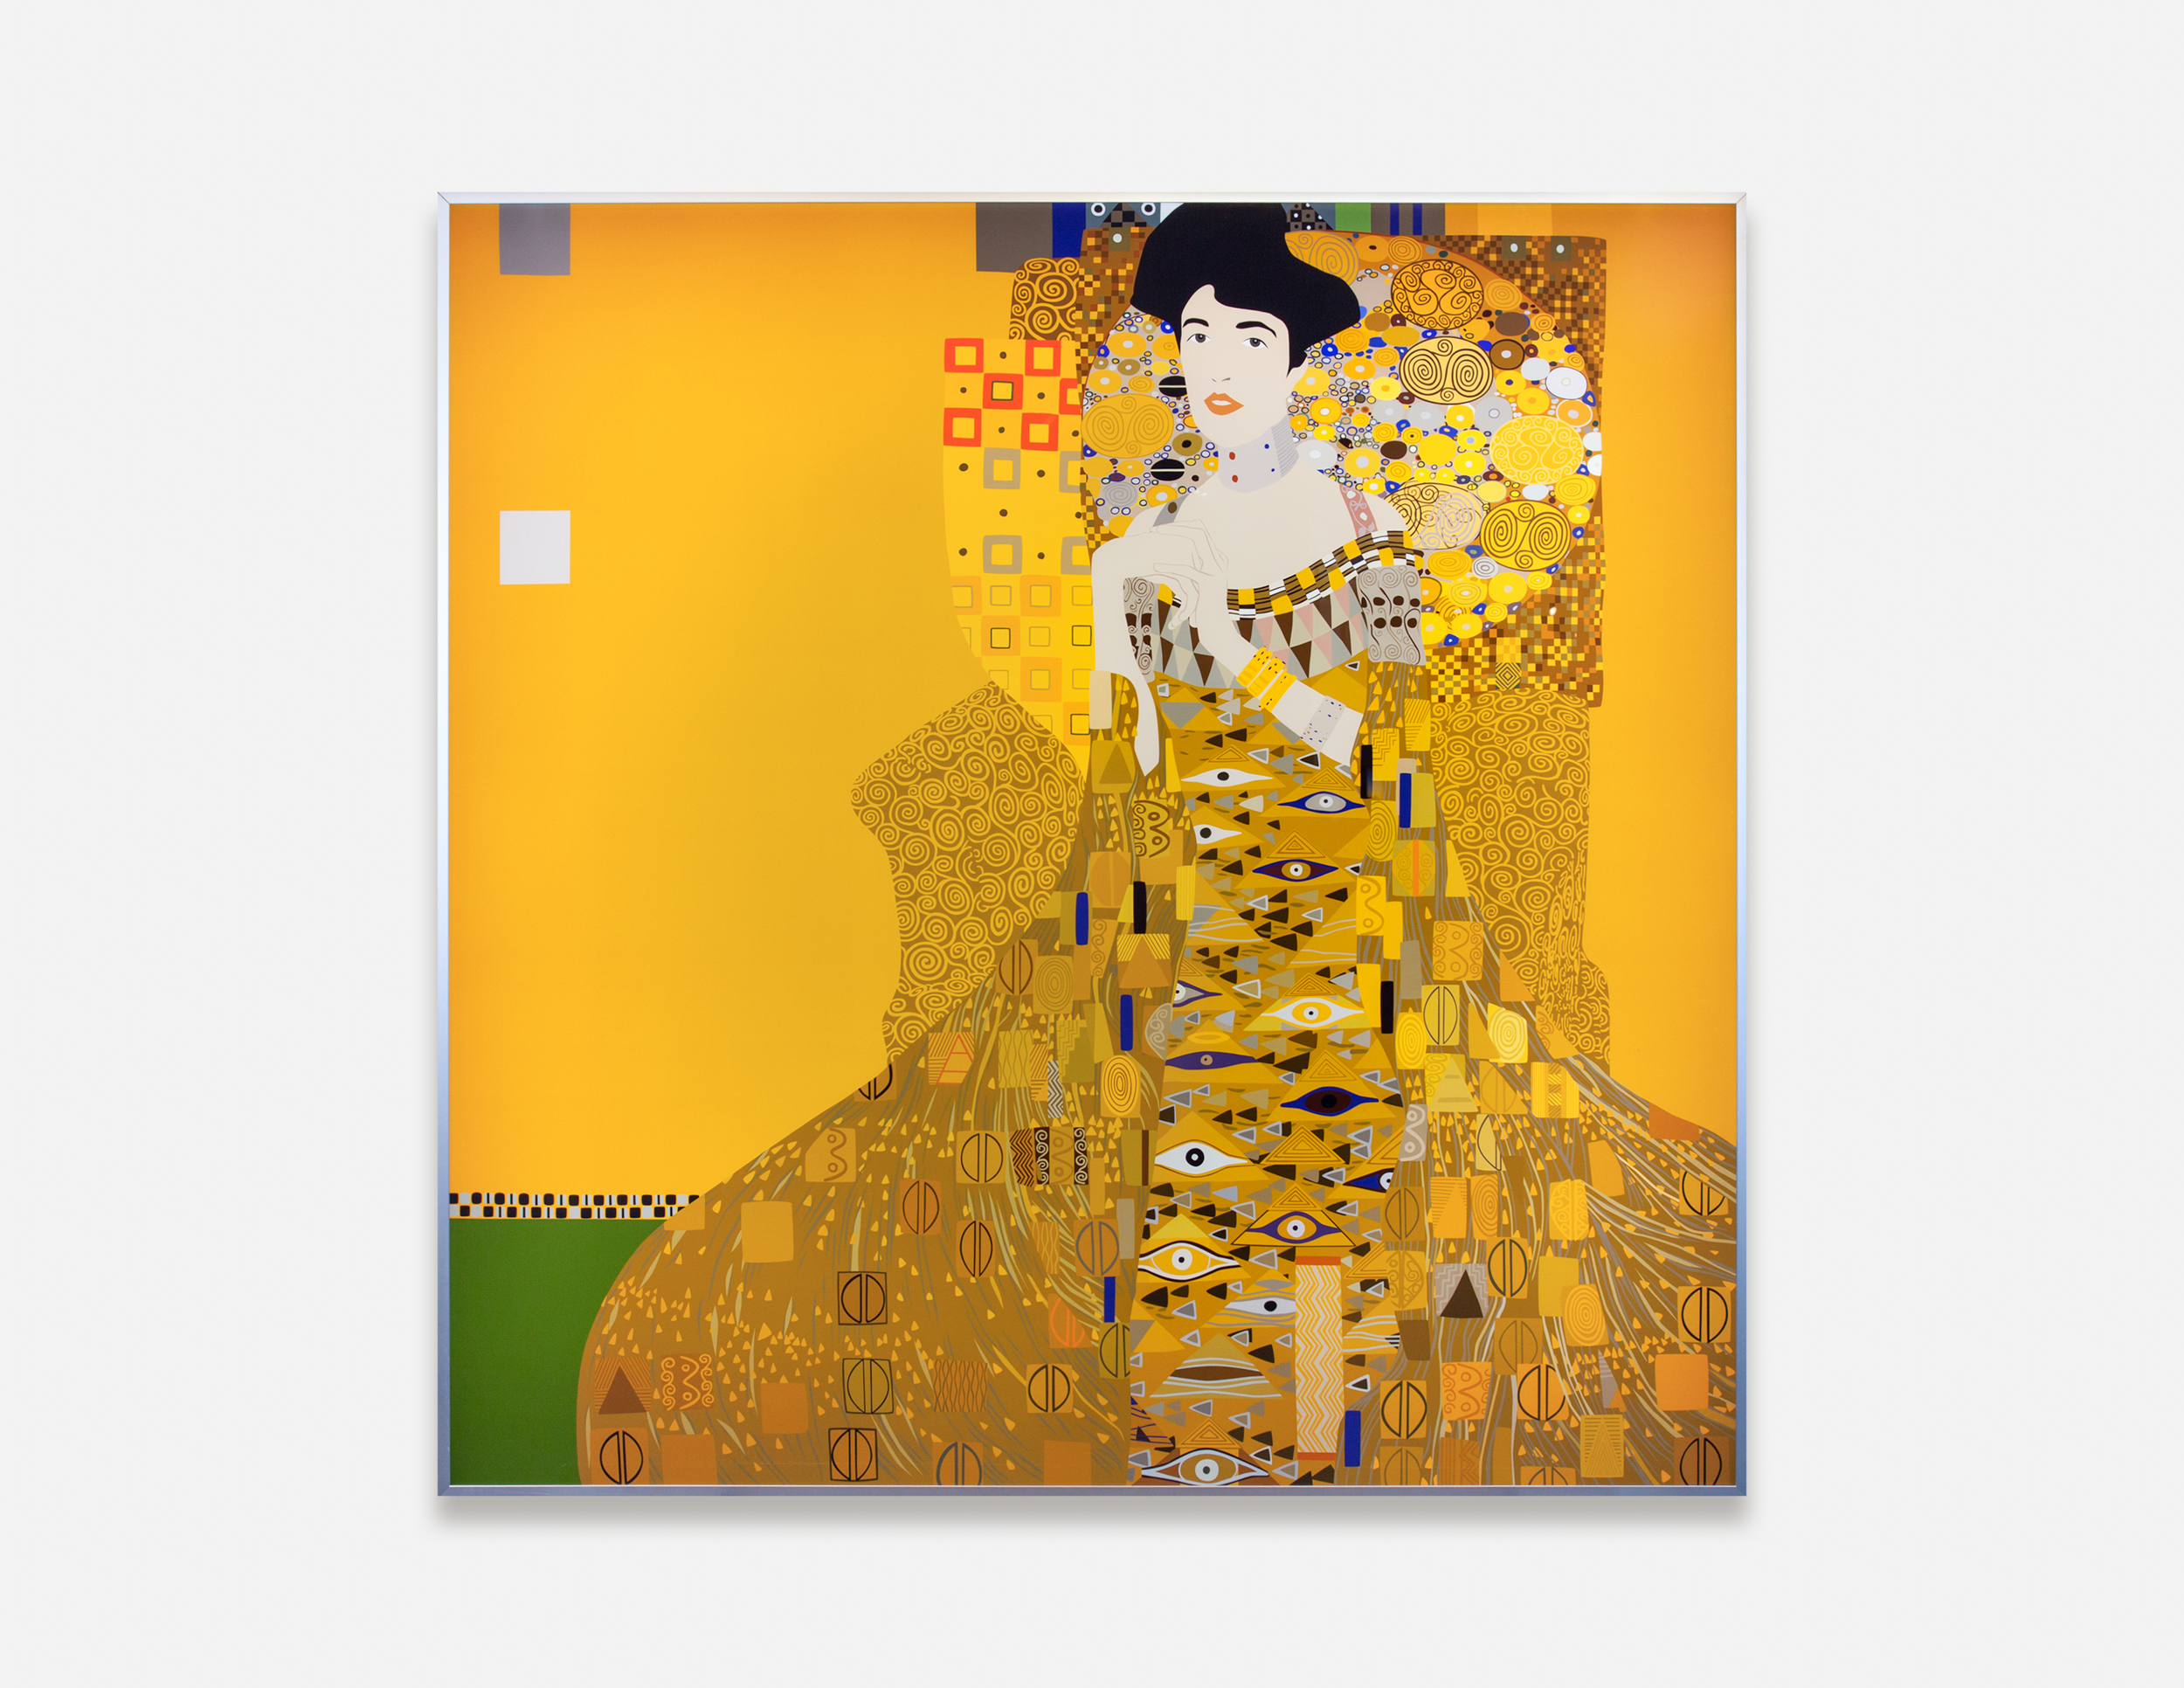 Color image of a color transparency on a light box depicting a figure in a yellow dress with adornments of various shapes against a yellow background